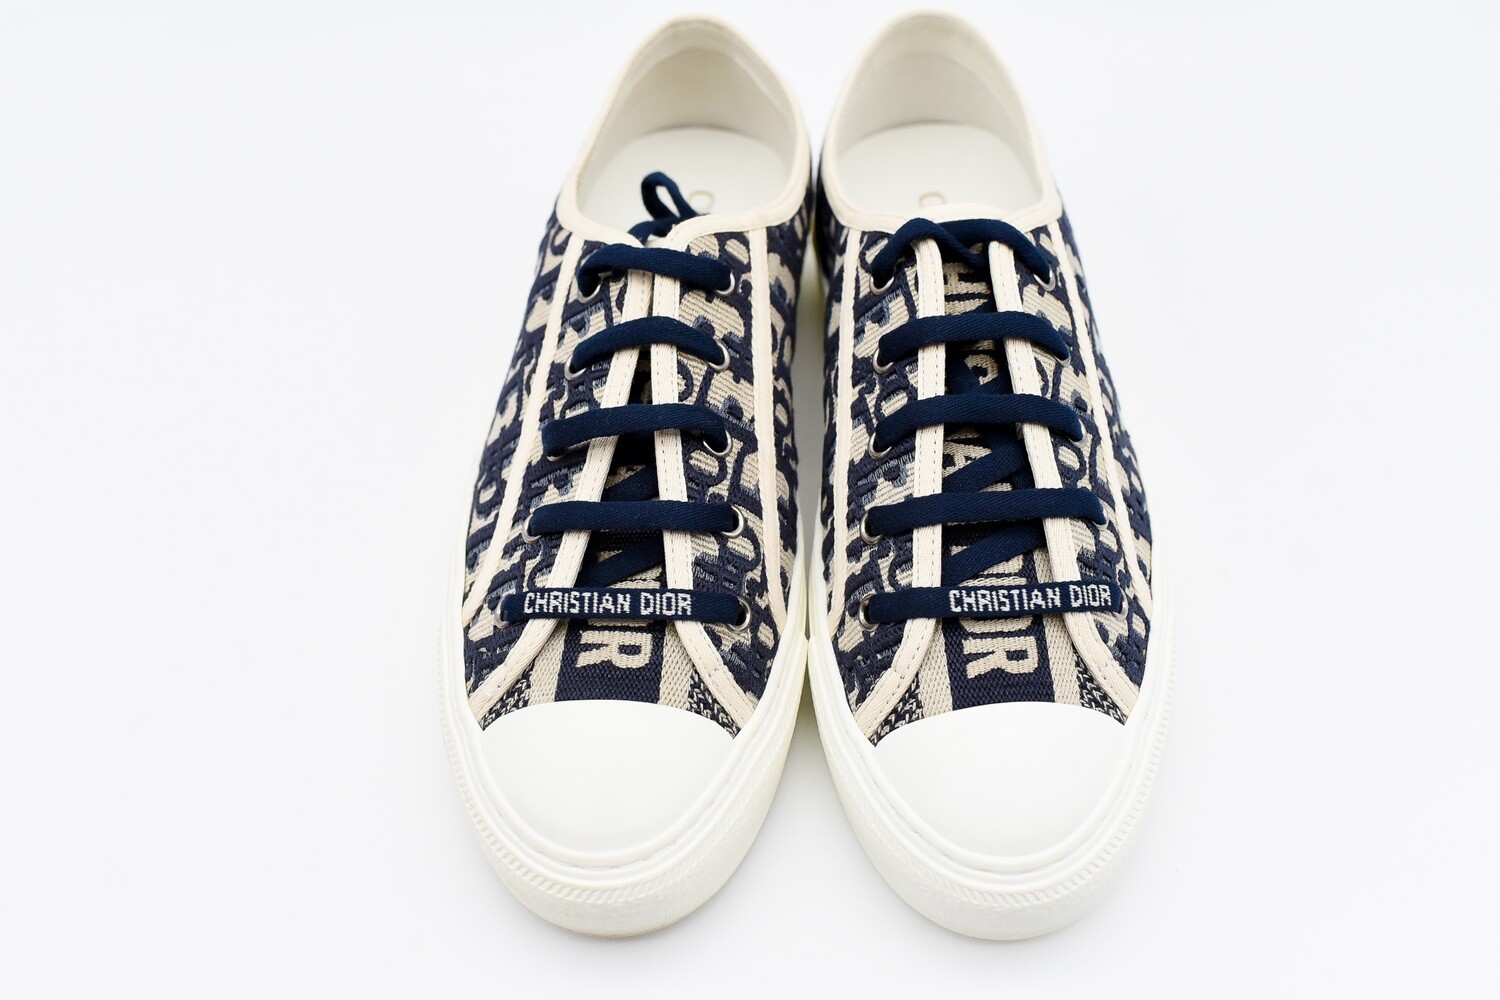 Christian Dior Shoes Sneakers, Navy and White, Size 40, New in Box GA006 -  Julia Rose Boston | Shop